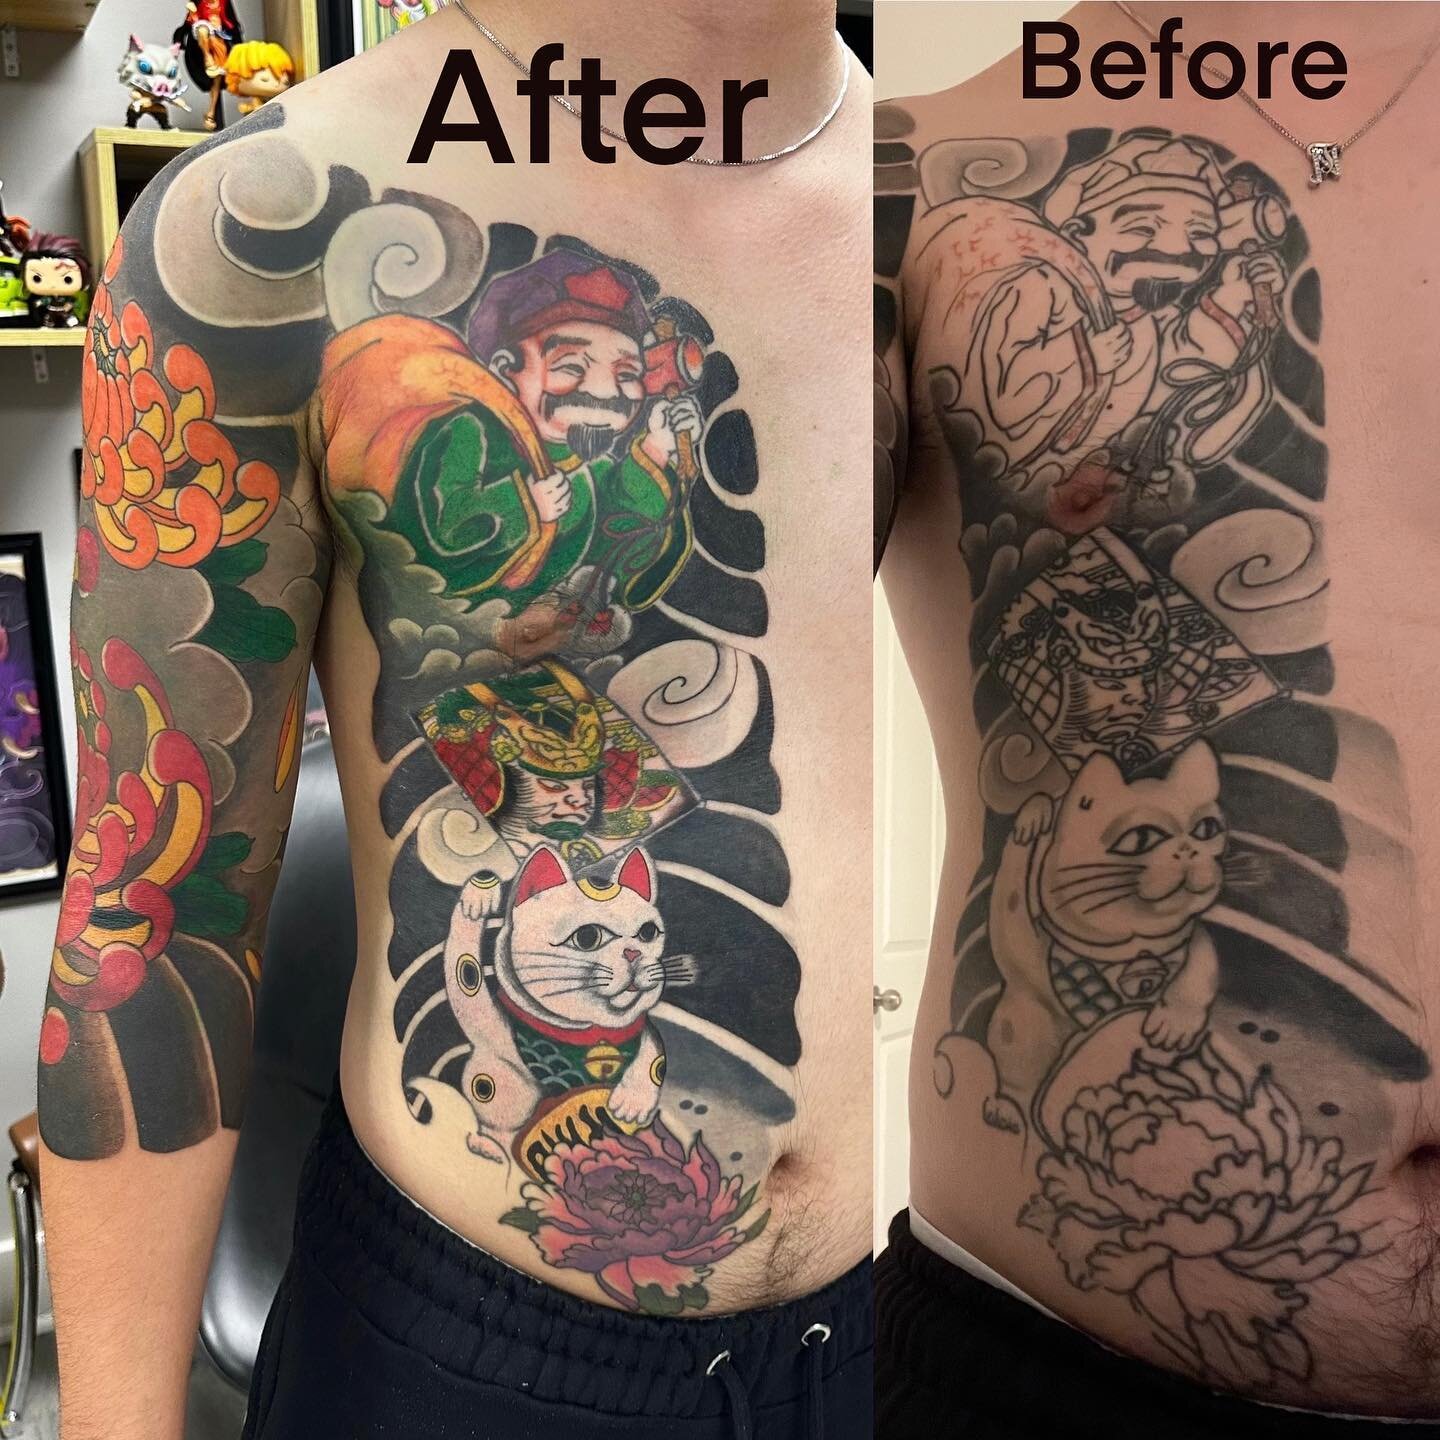 Finish Japanese style project. &quot;Before&quot; is from another tattoo artist. 

If you want to get cover up tattoo, send us a message

#japanesestyletattoo #tattooshop #tattooartist #coveruptattoo #tattooideas